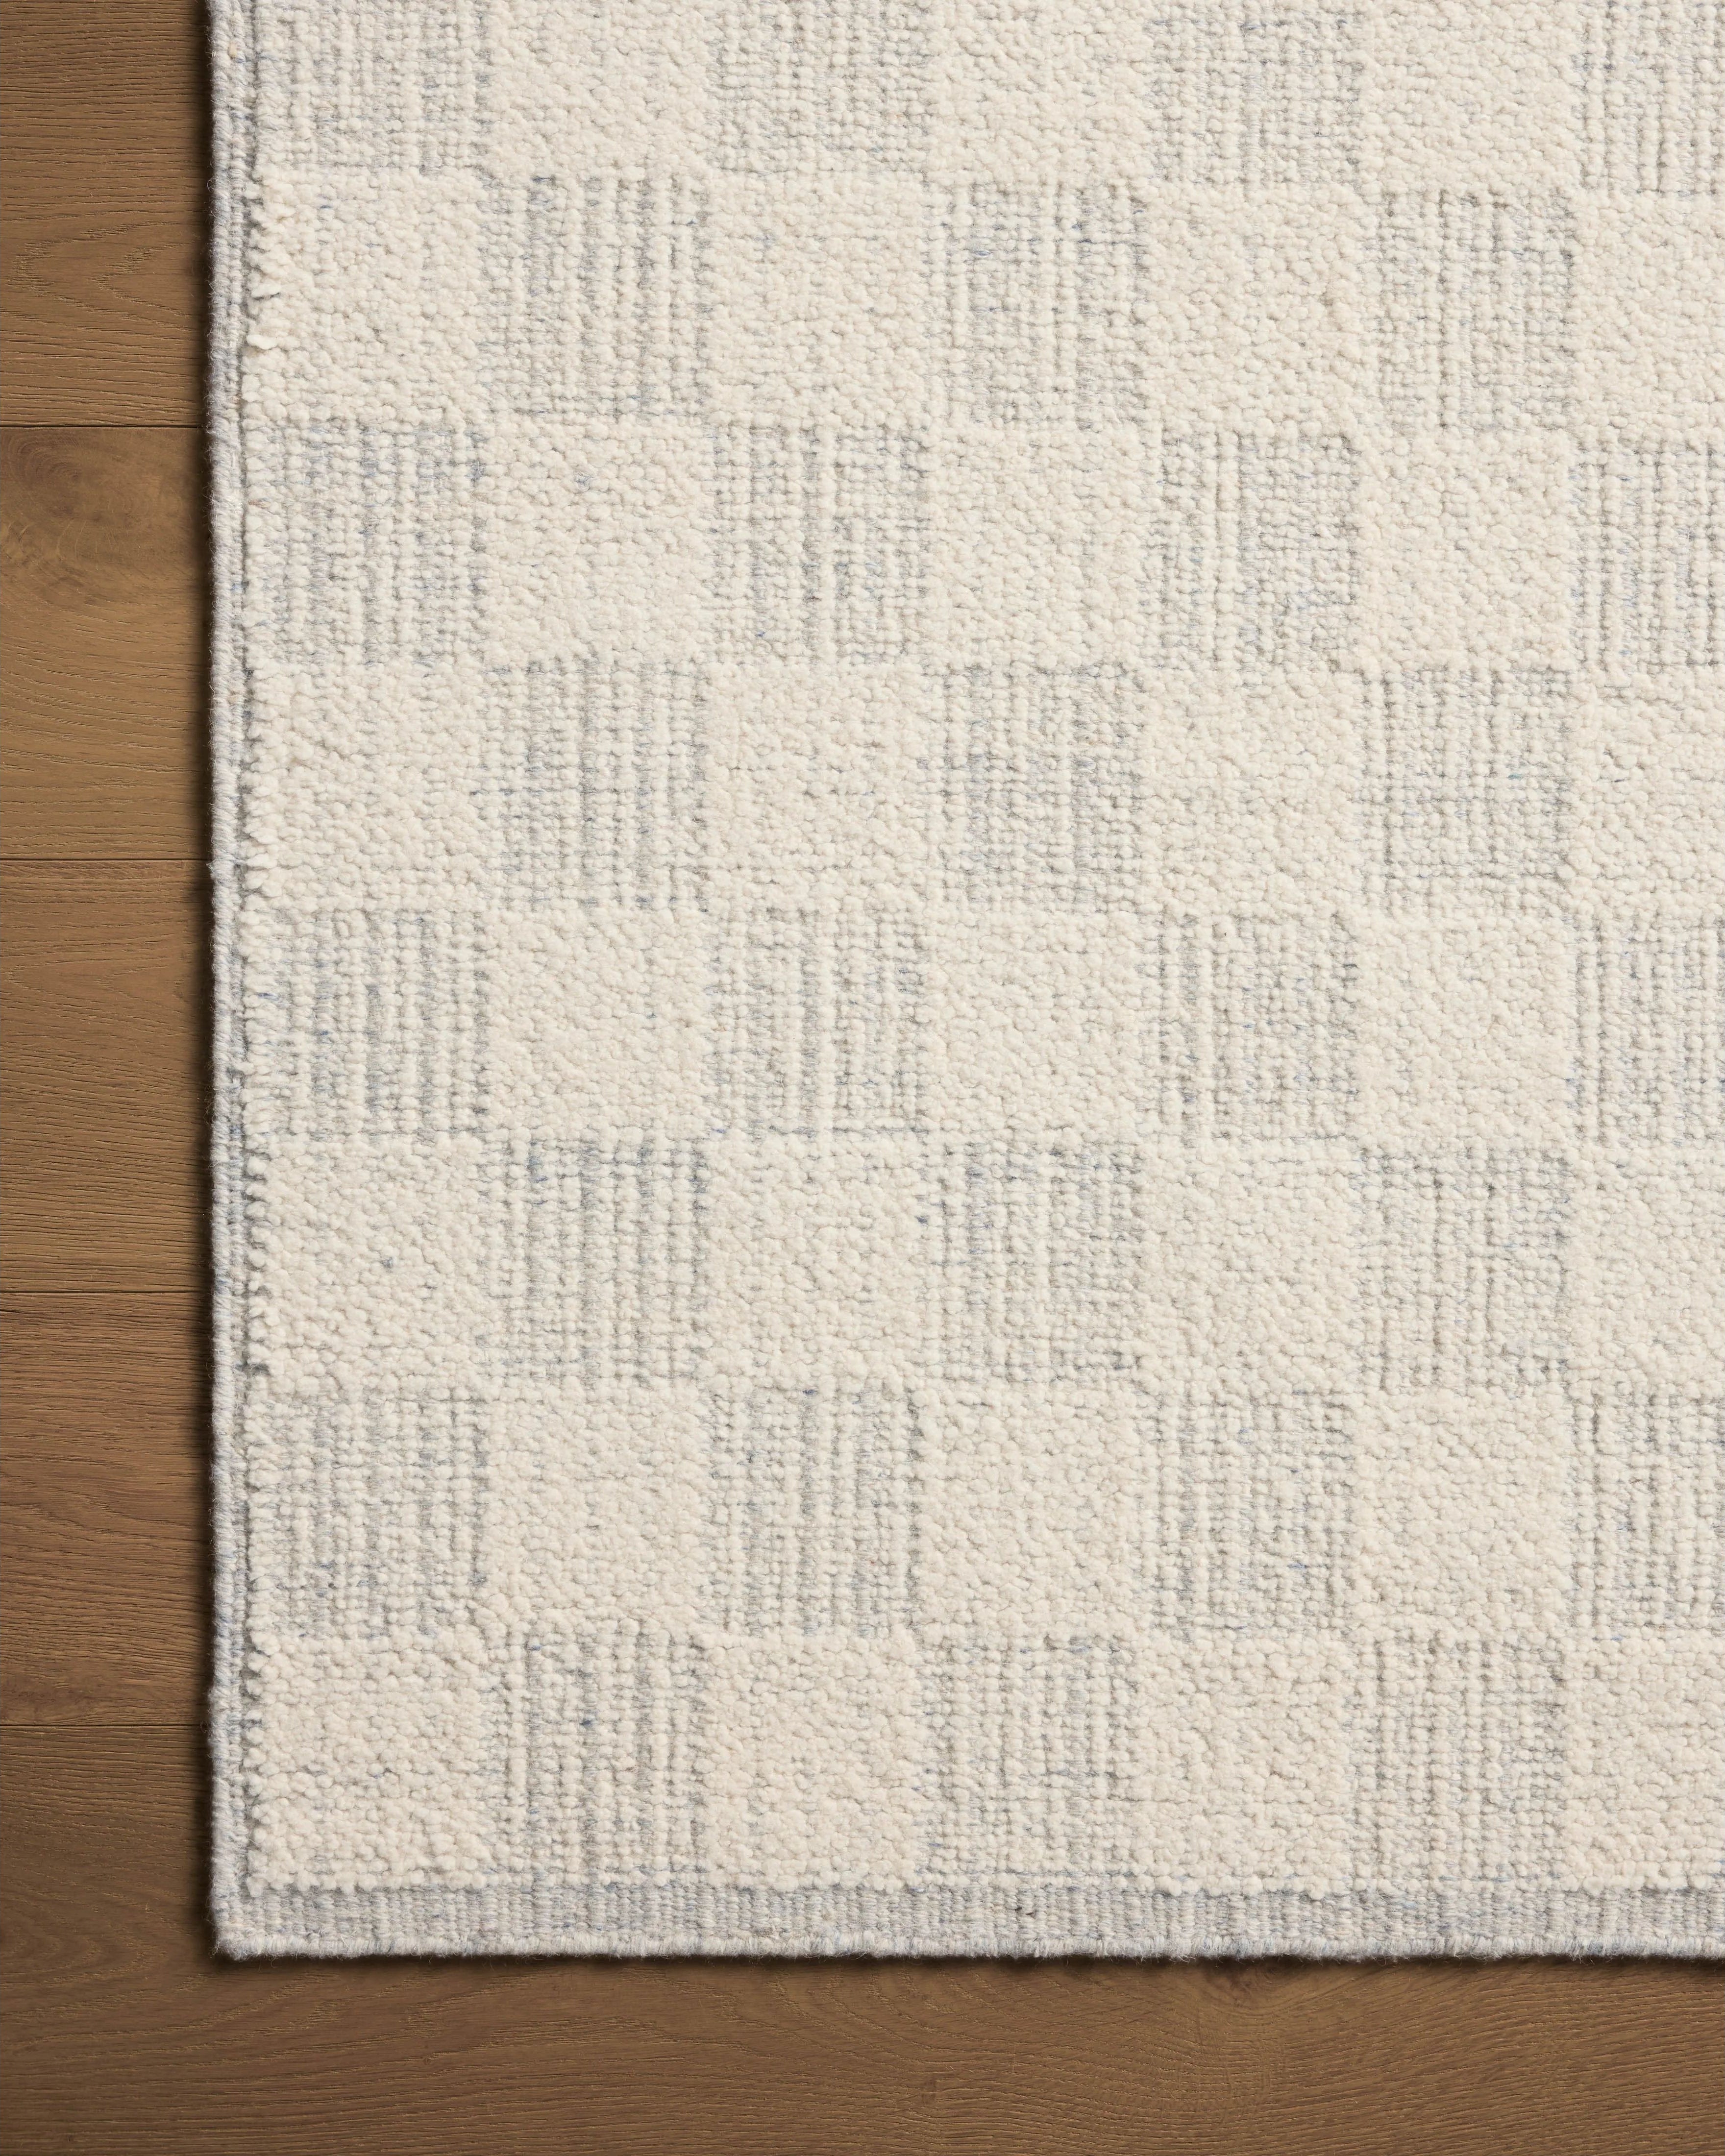 The Knox Ivory / Sky Rug by Brigette Romanek x Loloi is a handwoven area rug with a contemporary checkerboard pattern and a texture reminiscent of a luxurious knit sweater. Made of a blend of wool and cotton that plays with scale and texture, Knox is imbued with cozy luxury that can anchor any room. Amethyst Home provides interior design, new home construction design consulting, vintage area rugs, and lighting in the Austin metro area.